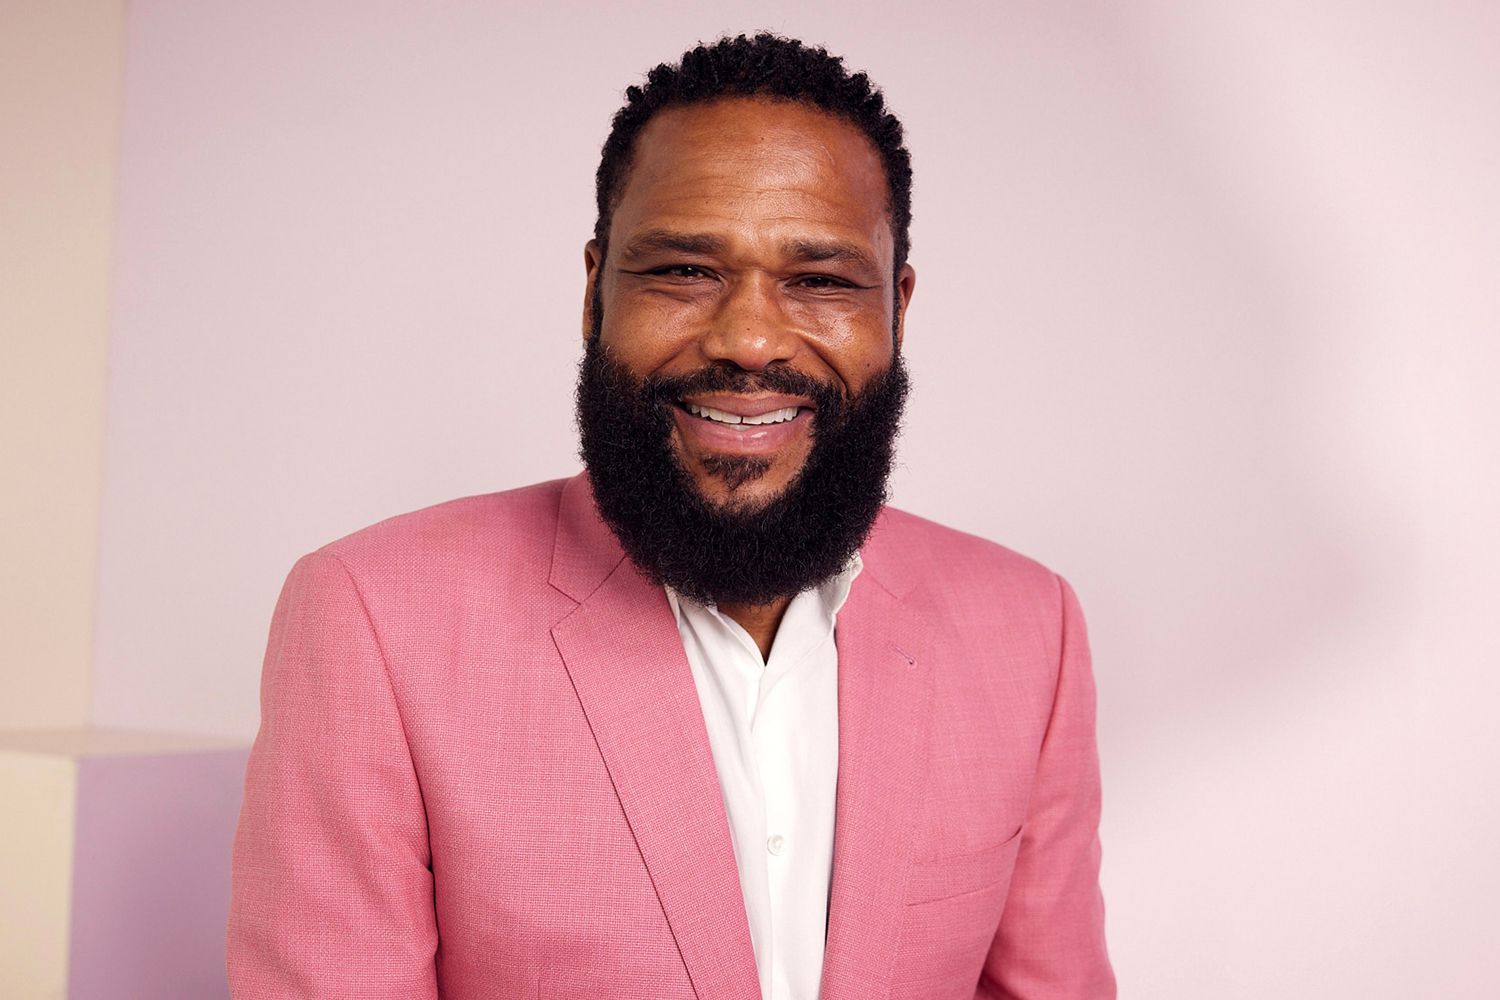 Anthony Anderson poses at the IMDb Official Portrait Studio during D23 2022 at Anaheim Convention Center on September 09, 2022